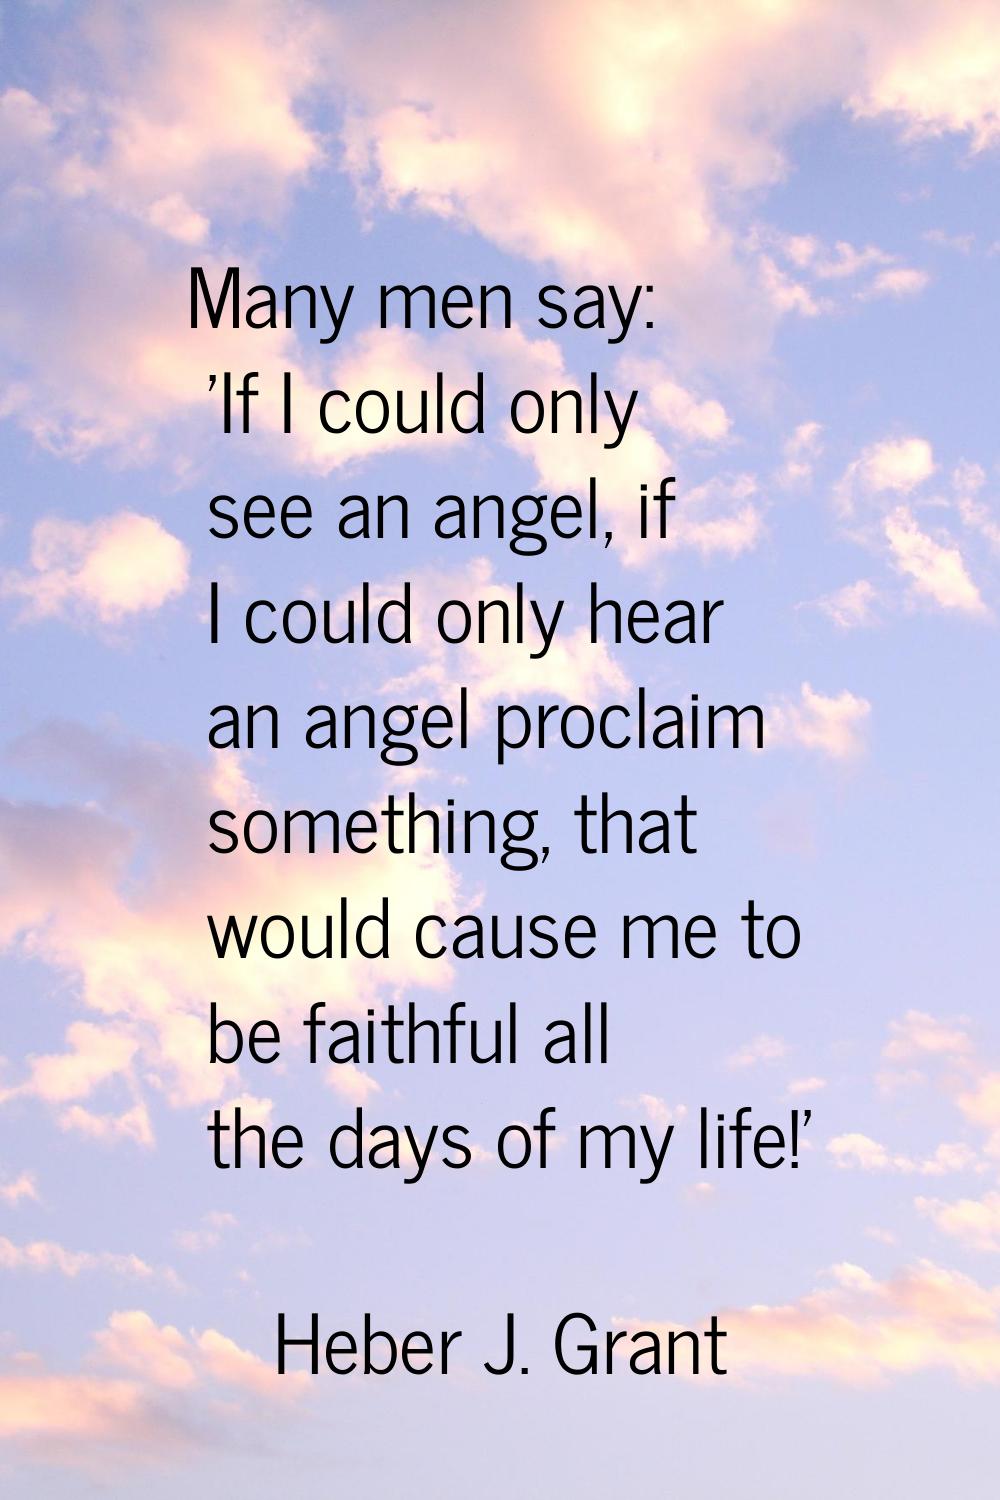 Many men say: 'If I could only see an angel, if I could only hear an angel proclaim something, that